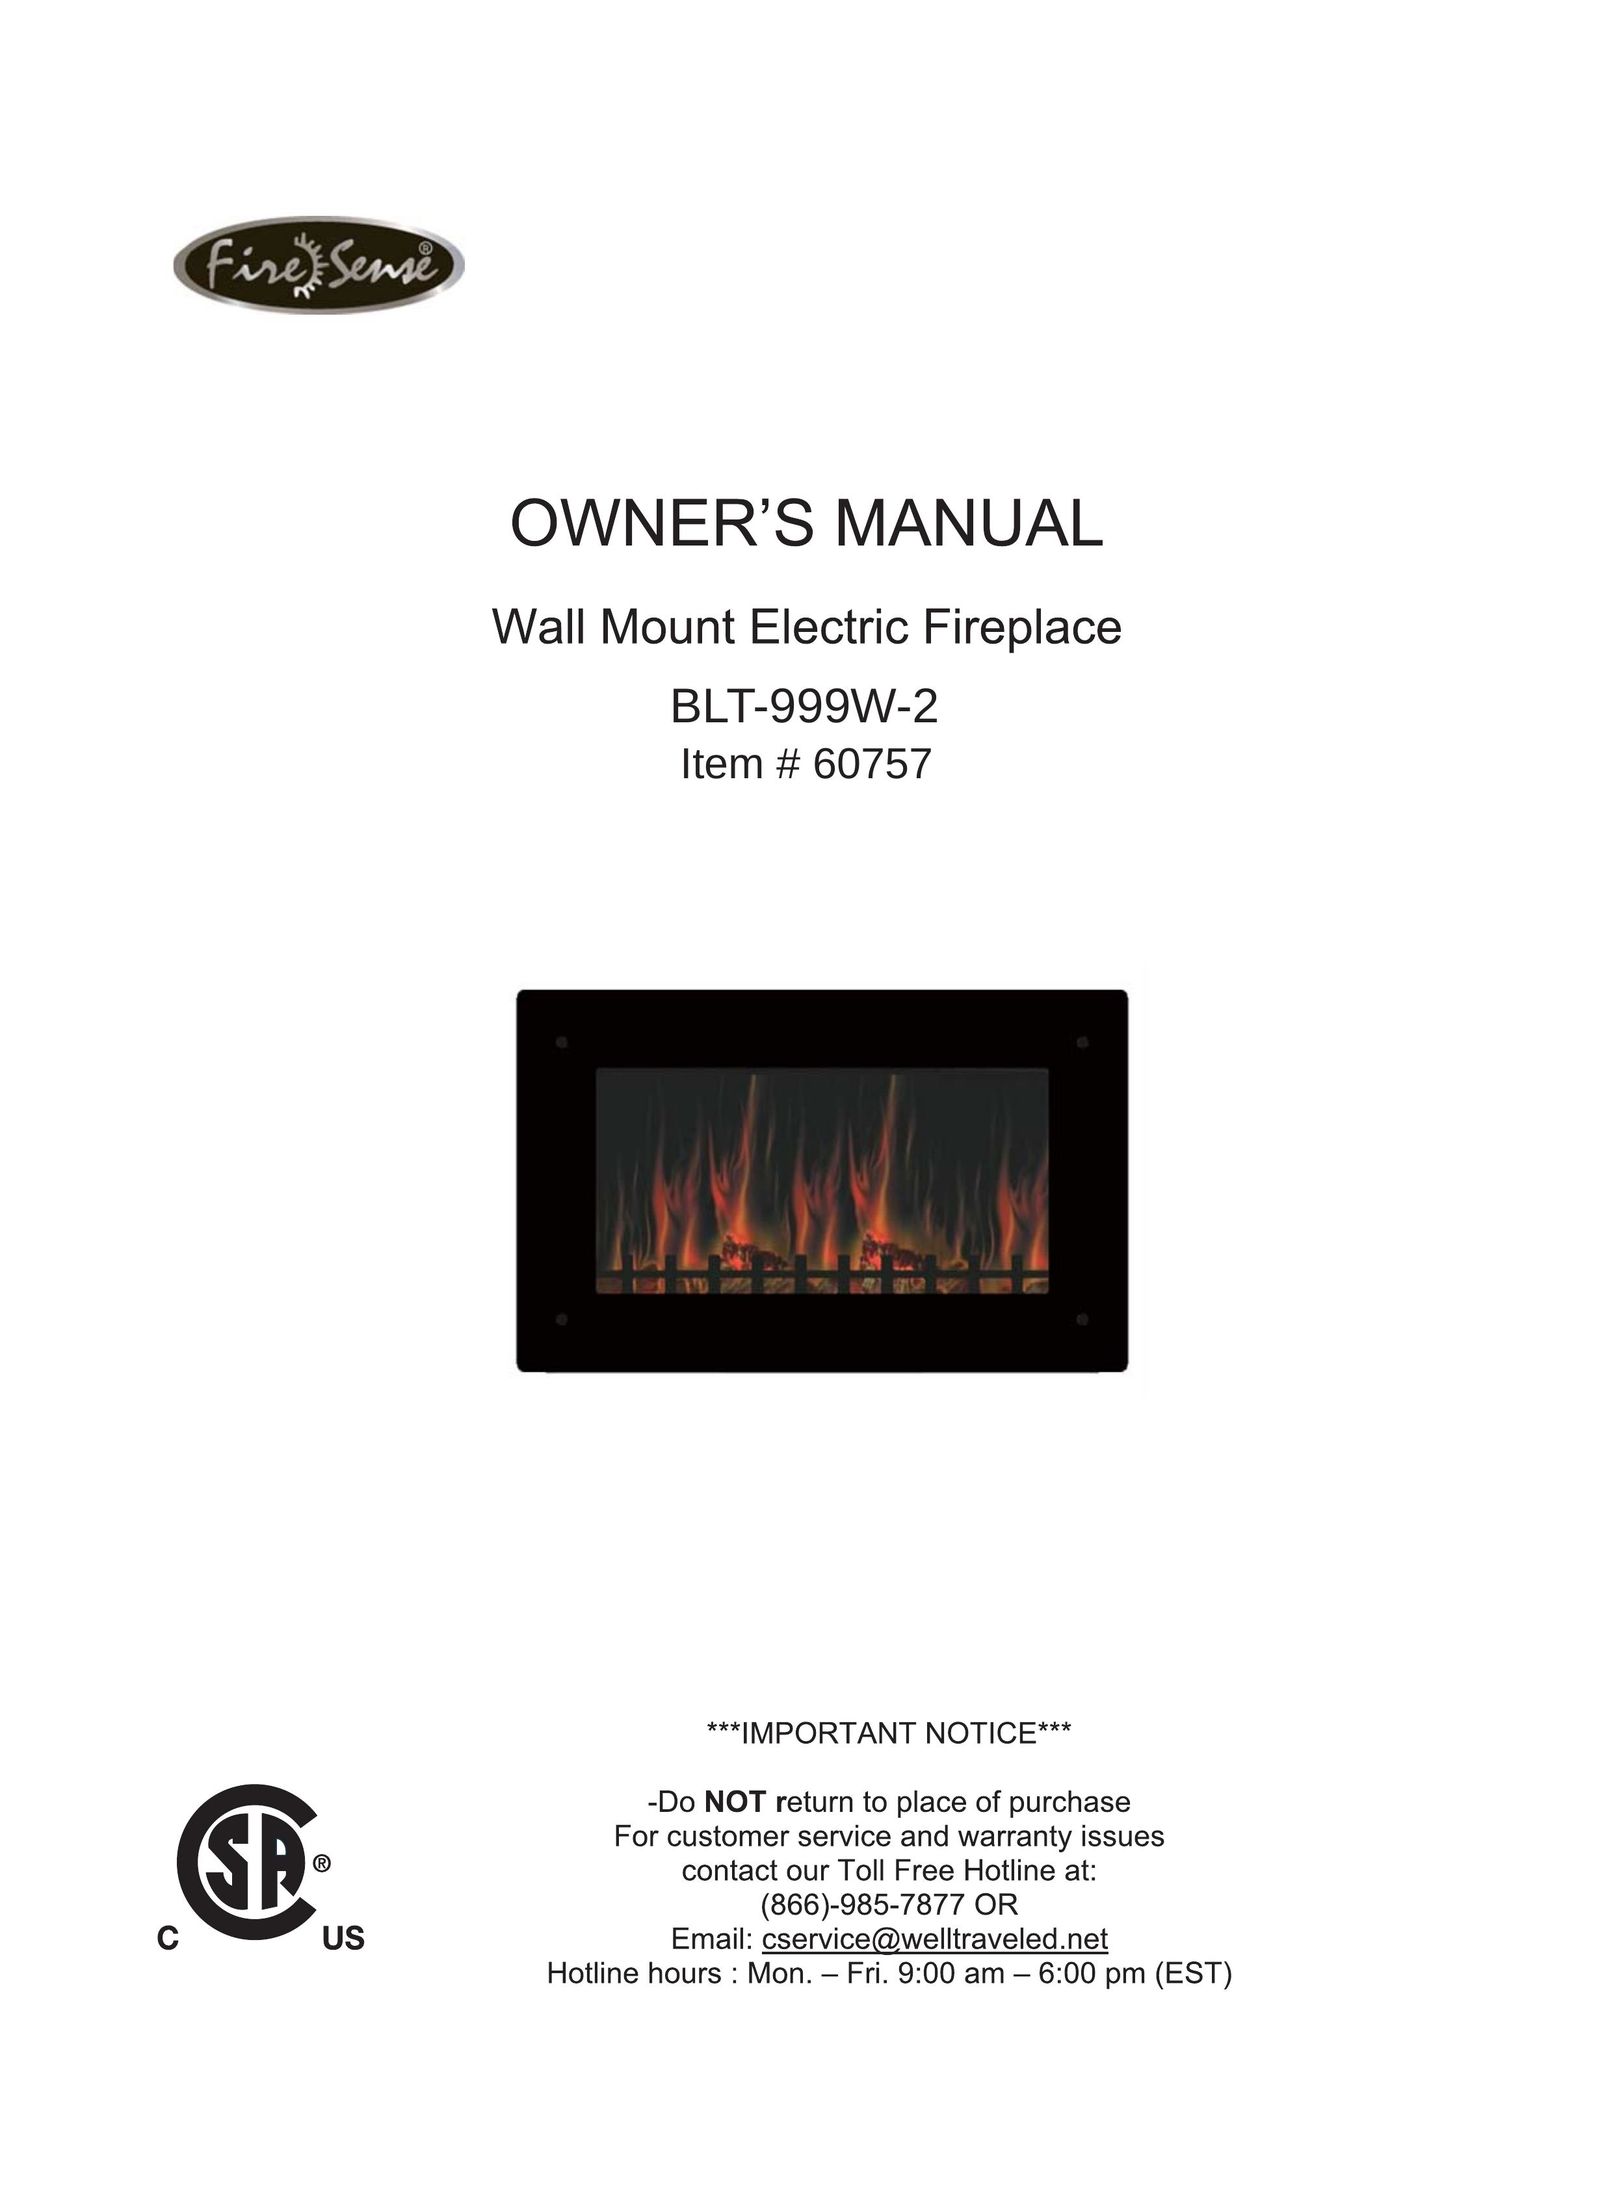 Well Traveled Living BLT-999W-2 Indoor Fireplace User Manual